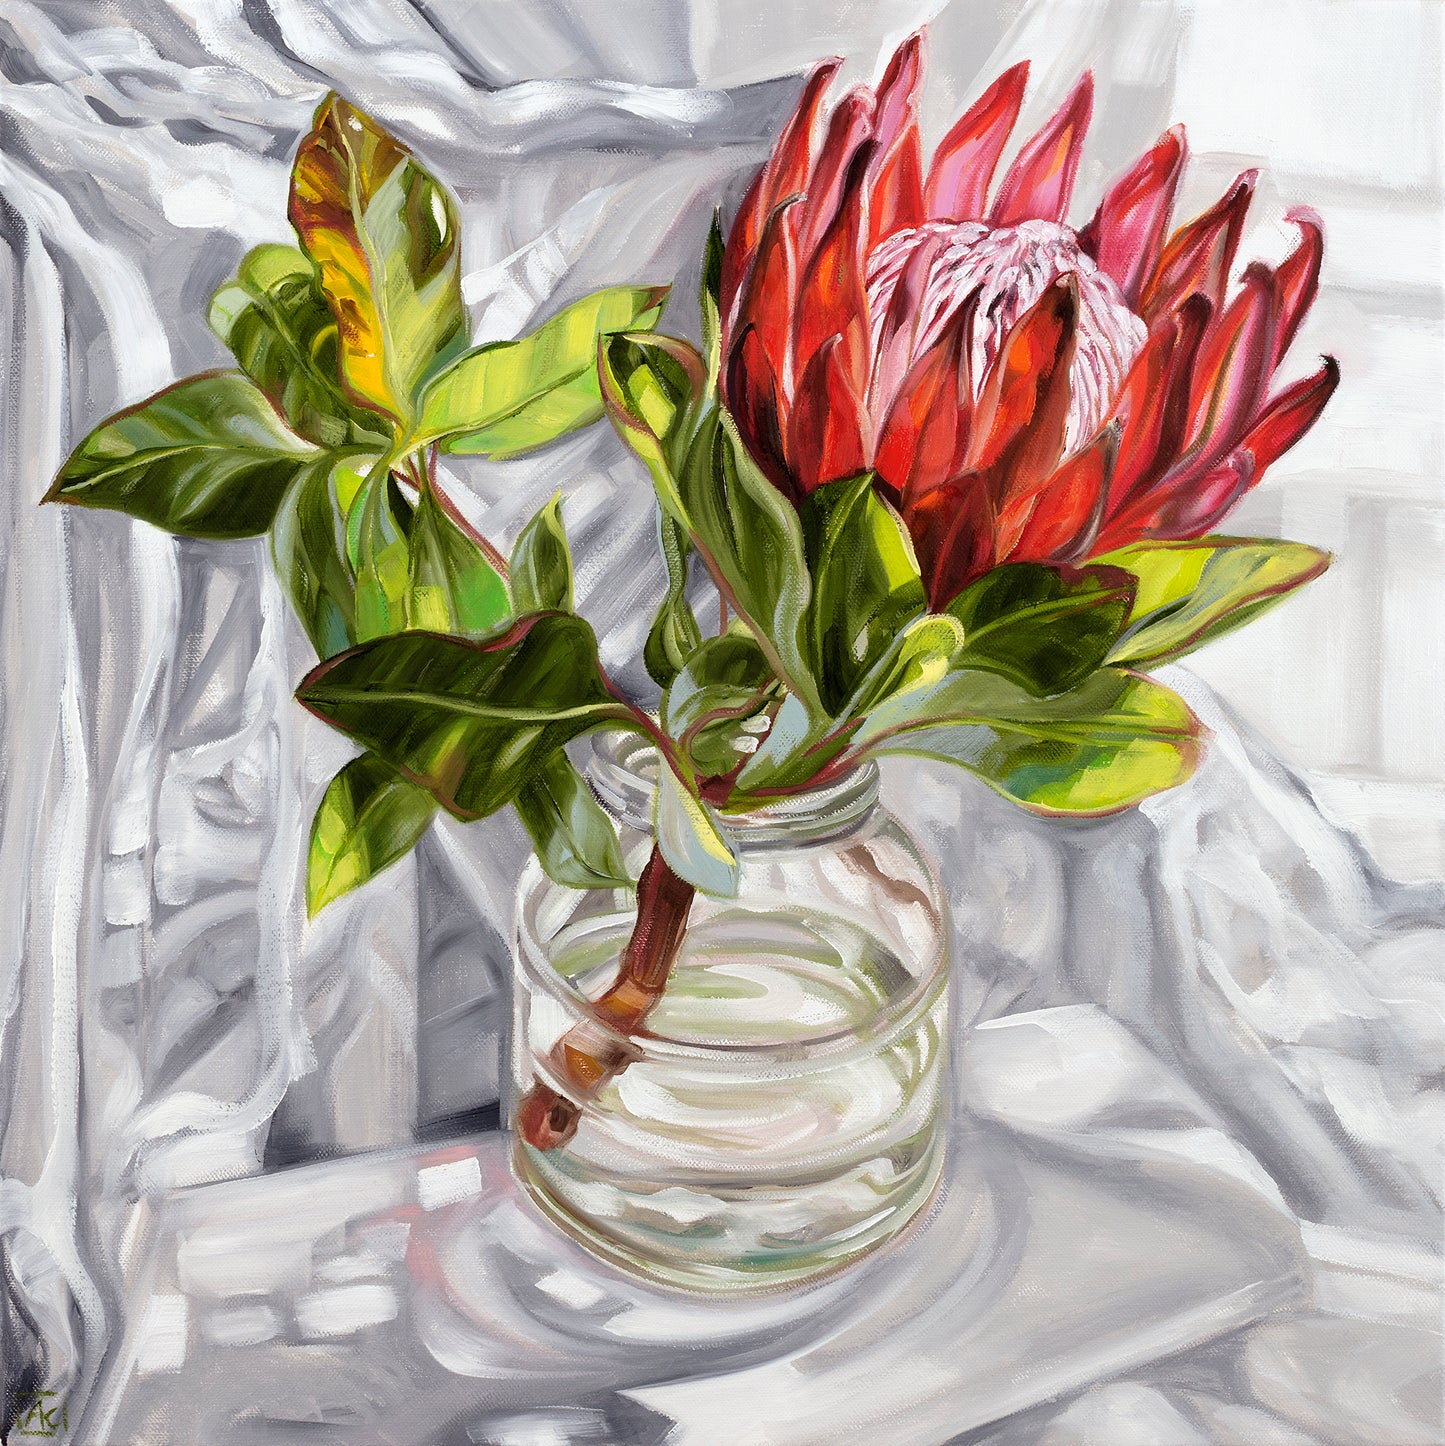 Vintage Actil Sheet Protea glows like a King - LIMITED EDITION GICLEE PRINT Ed. 1 of 25